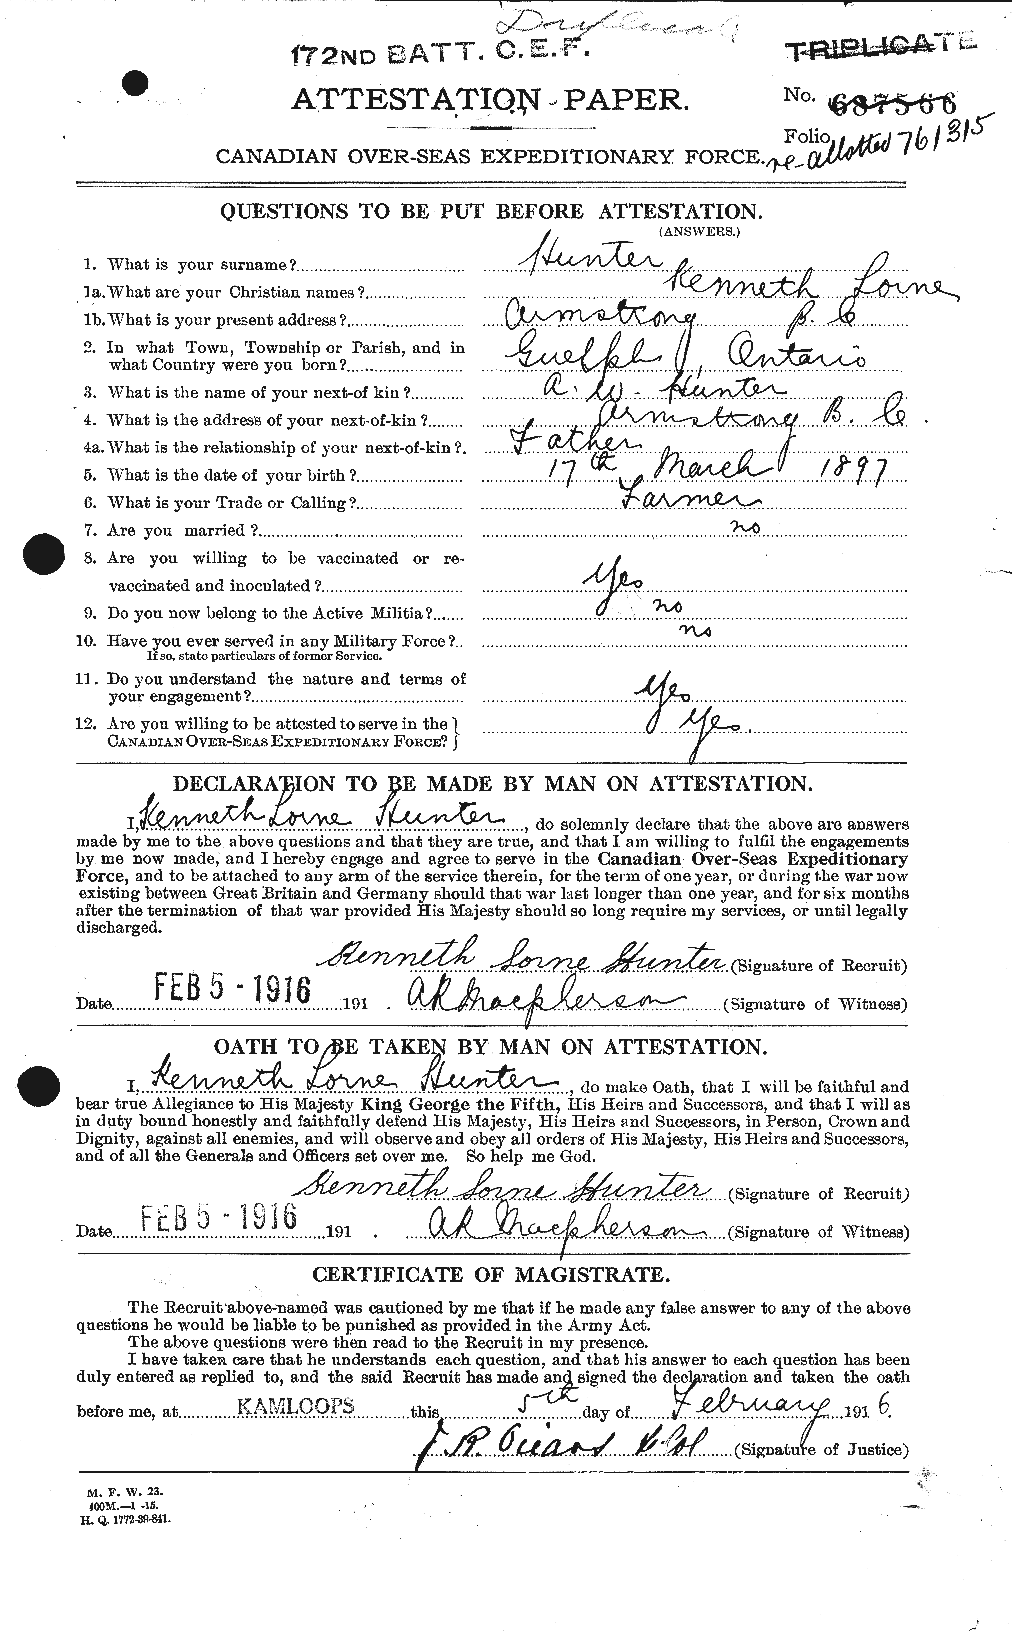 Personnel Records of the First World War - CEF 406396a